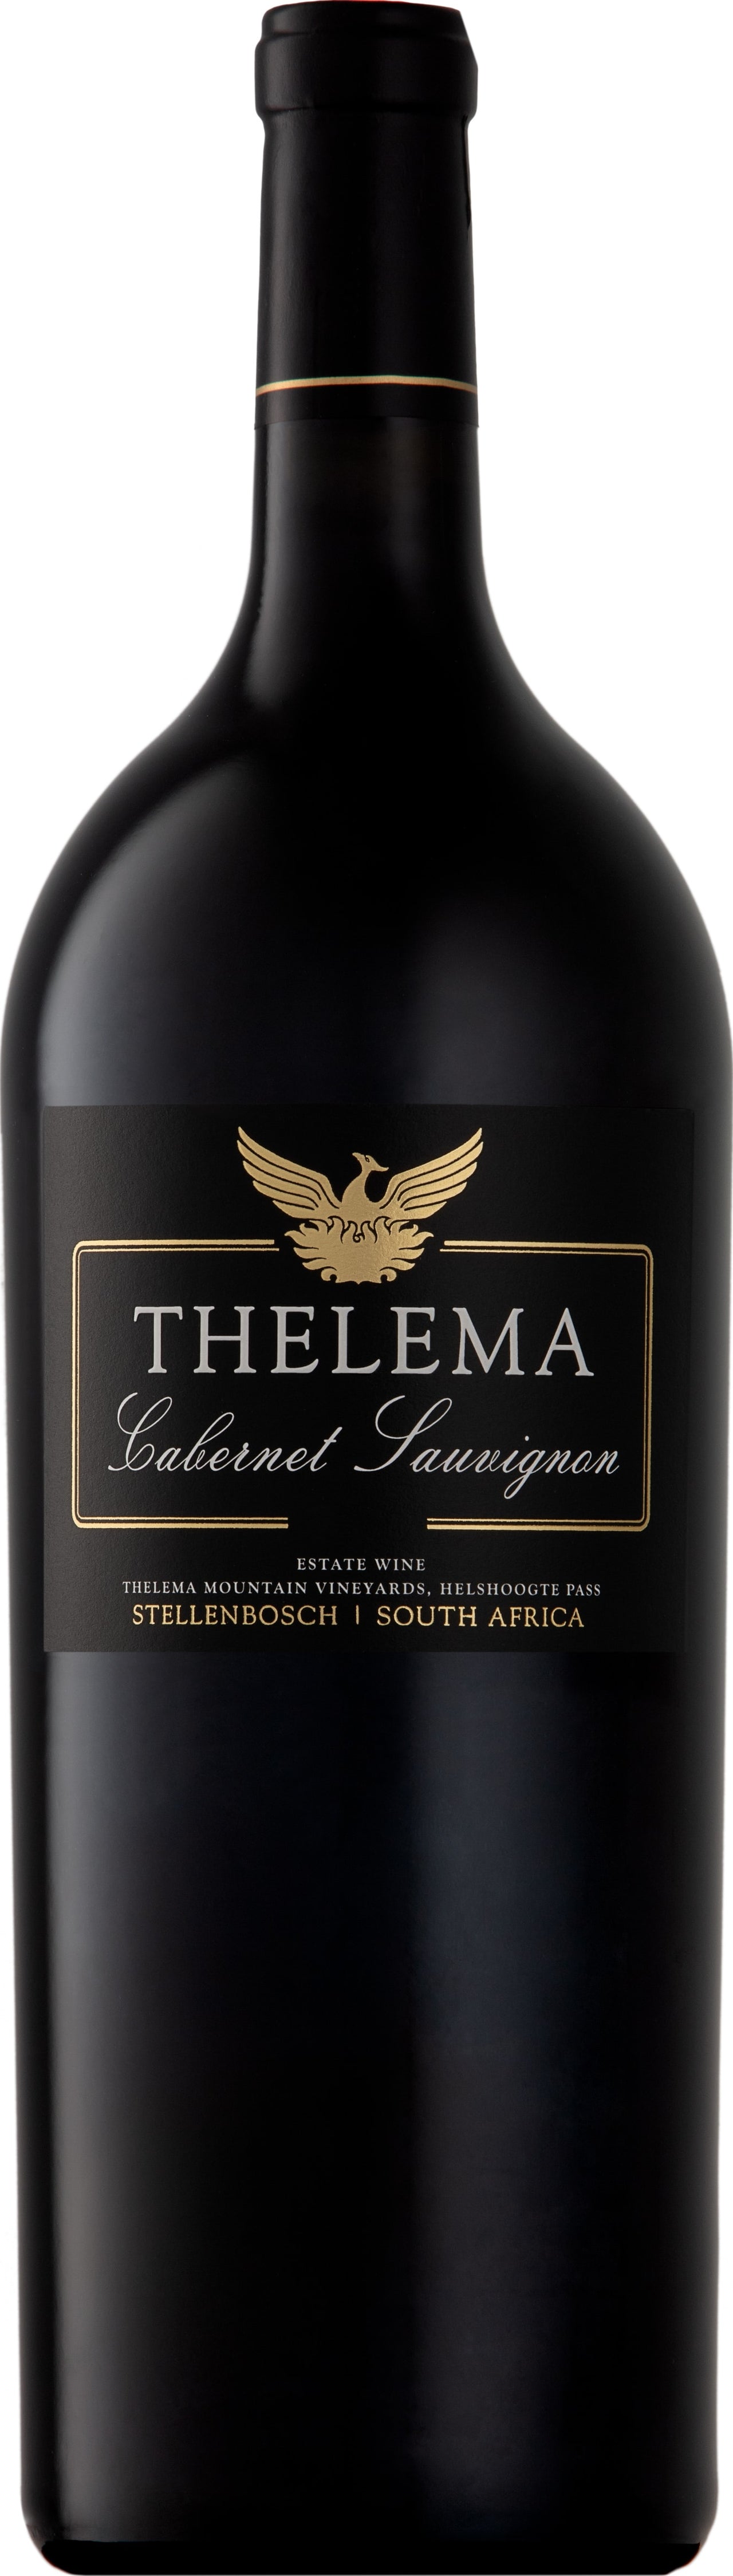 Thelema Mountain Vineyards Cabernet Sauvignon Magnum 2019 150cl - Buy Thelema Mountain Vineyards Wines from GREAT WINES DIRECT wine shop